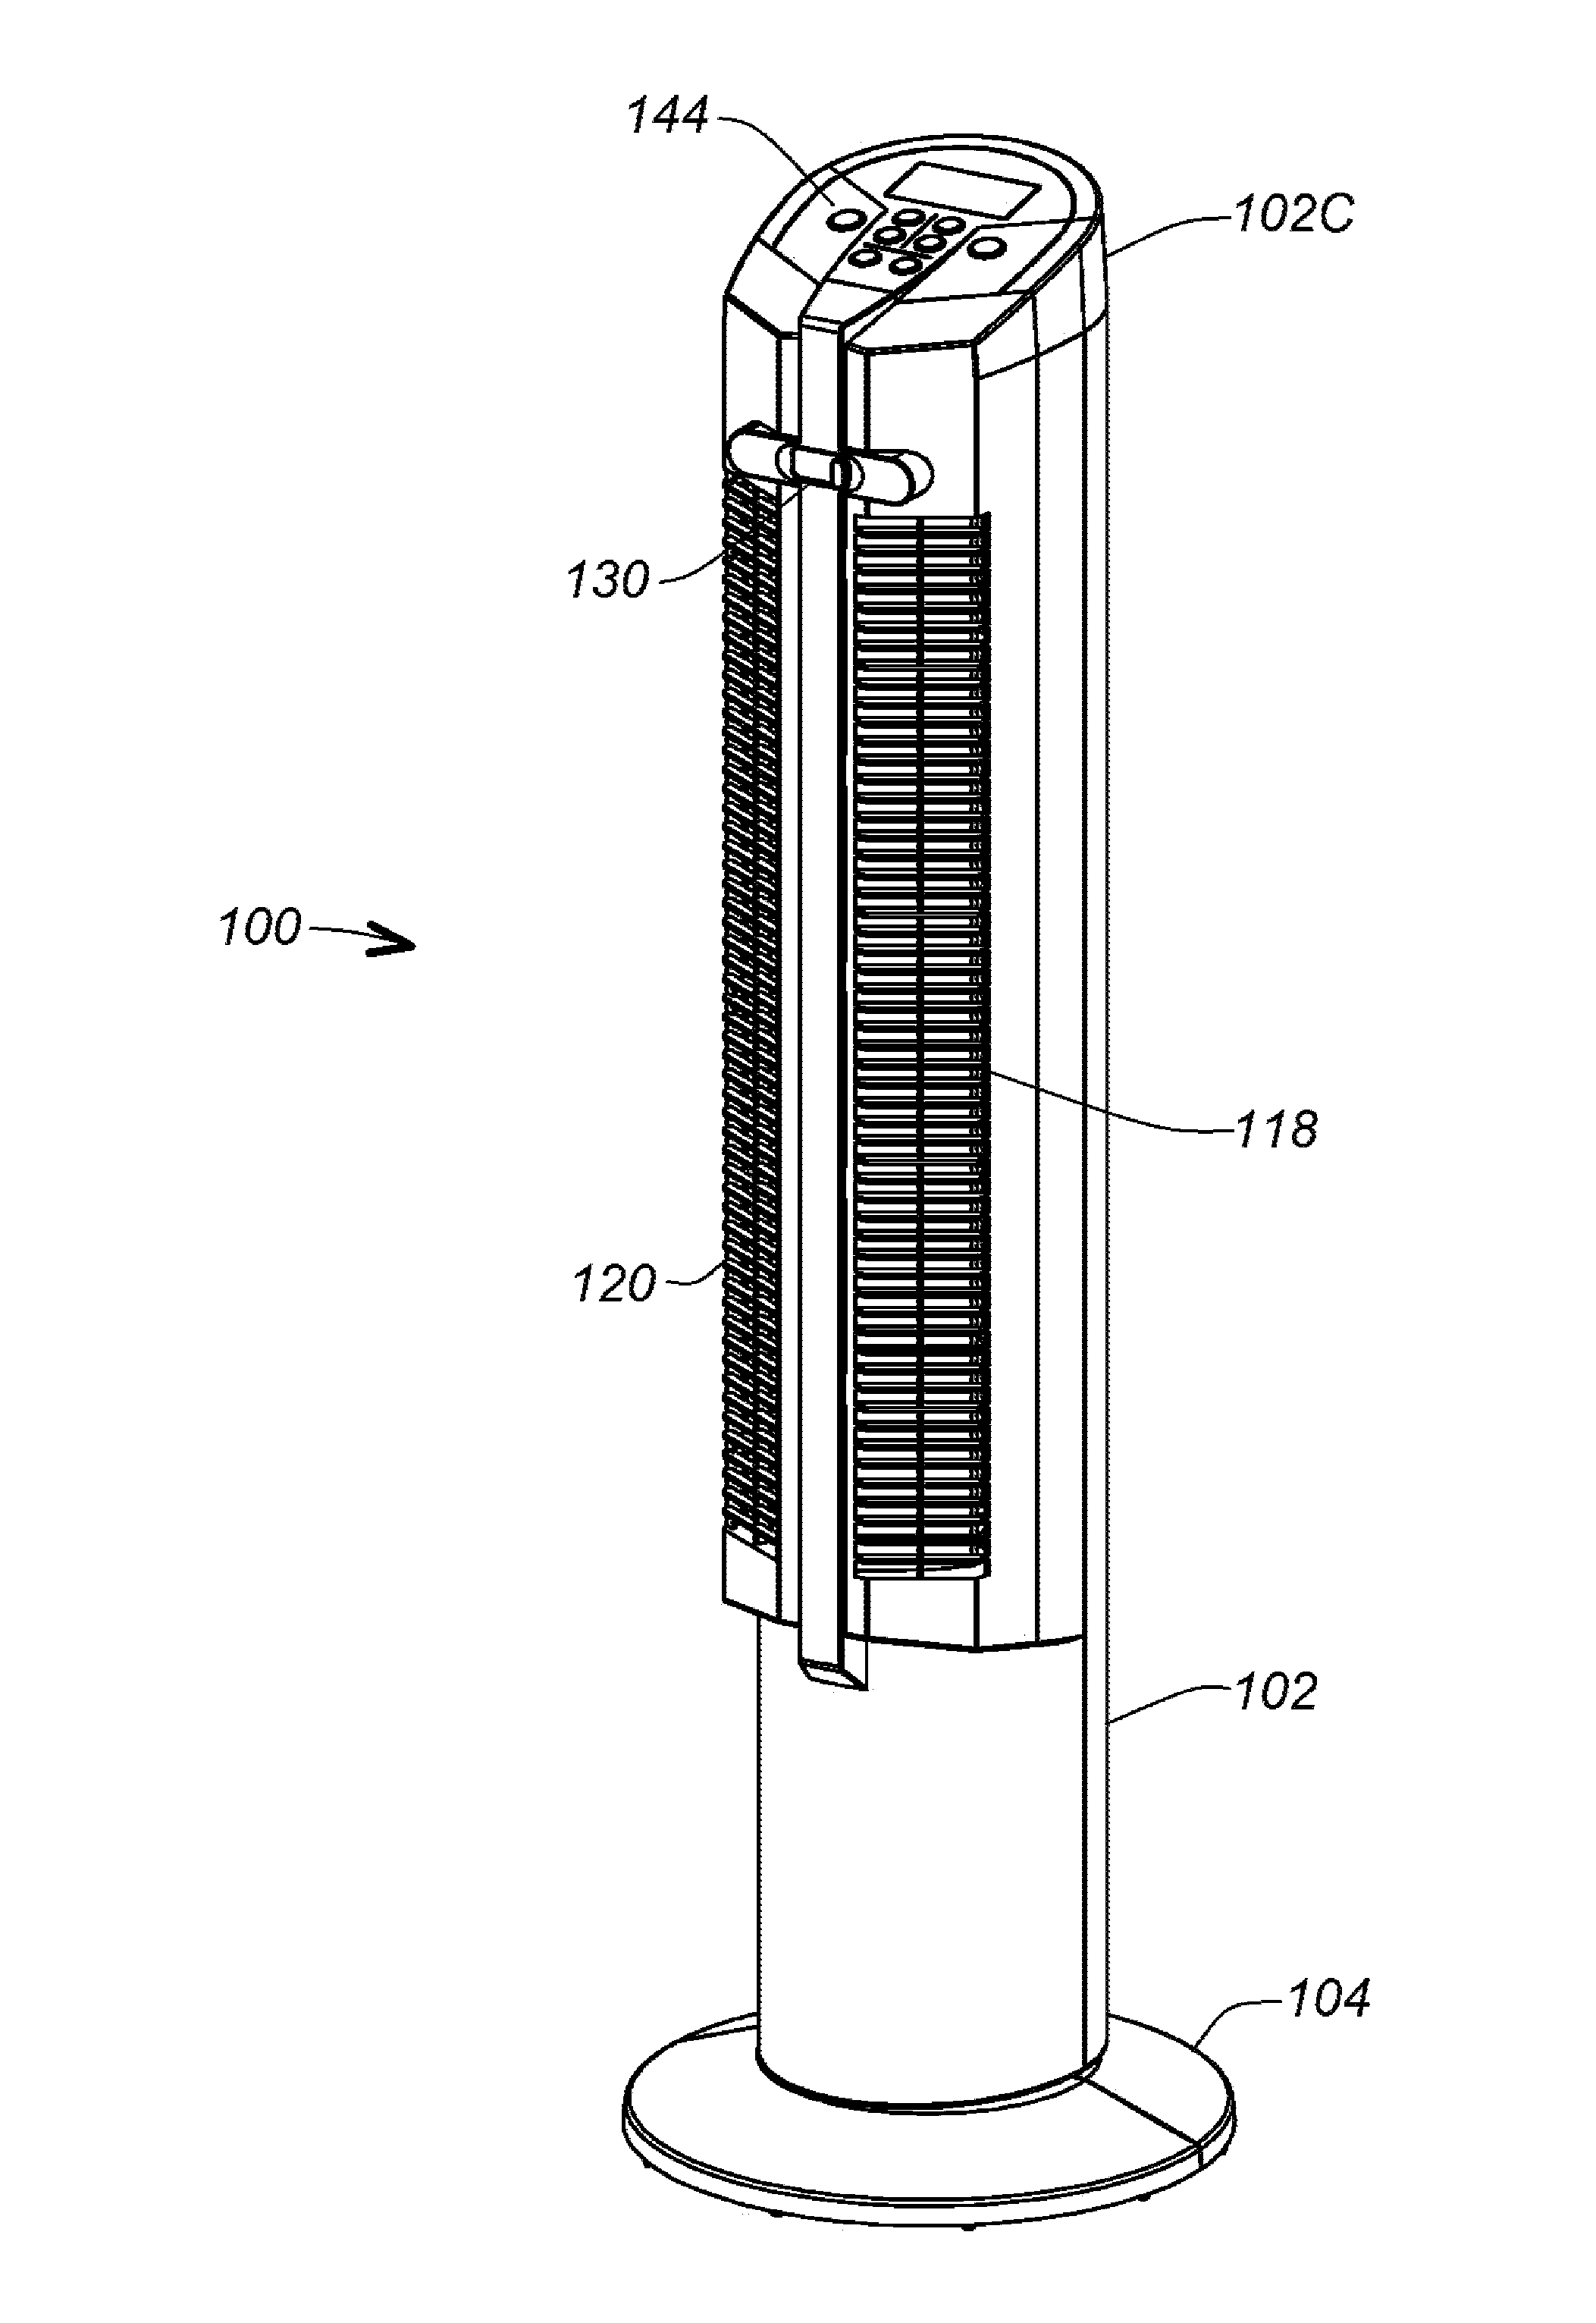 Heating and cooling apparatus